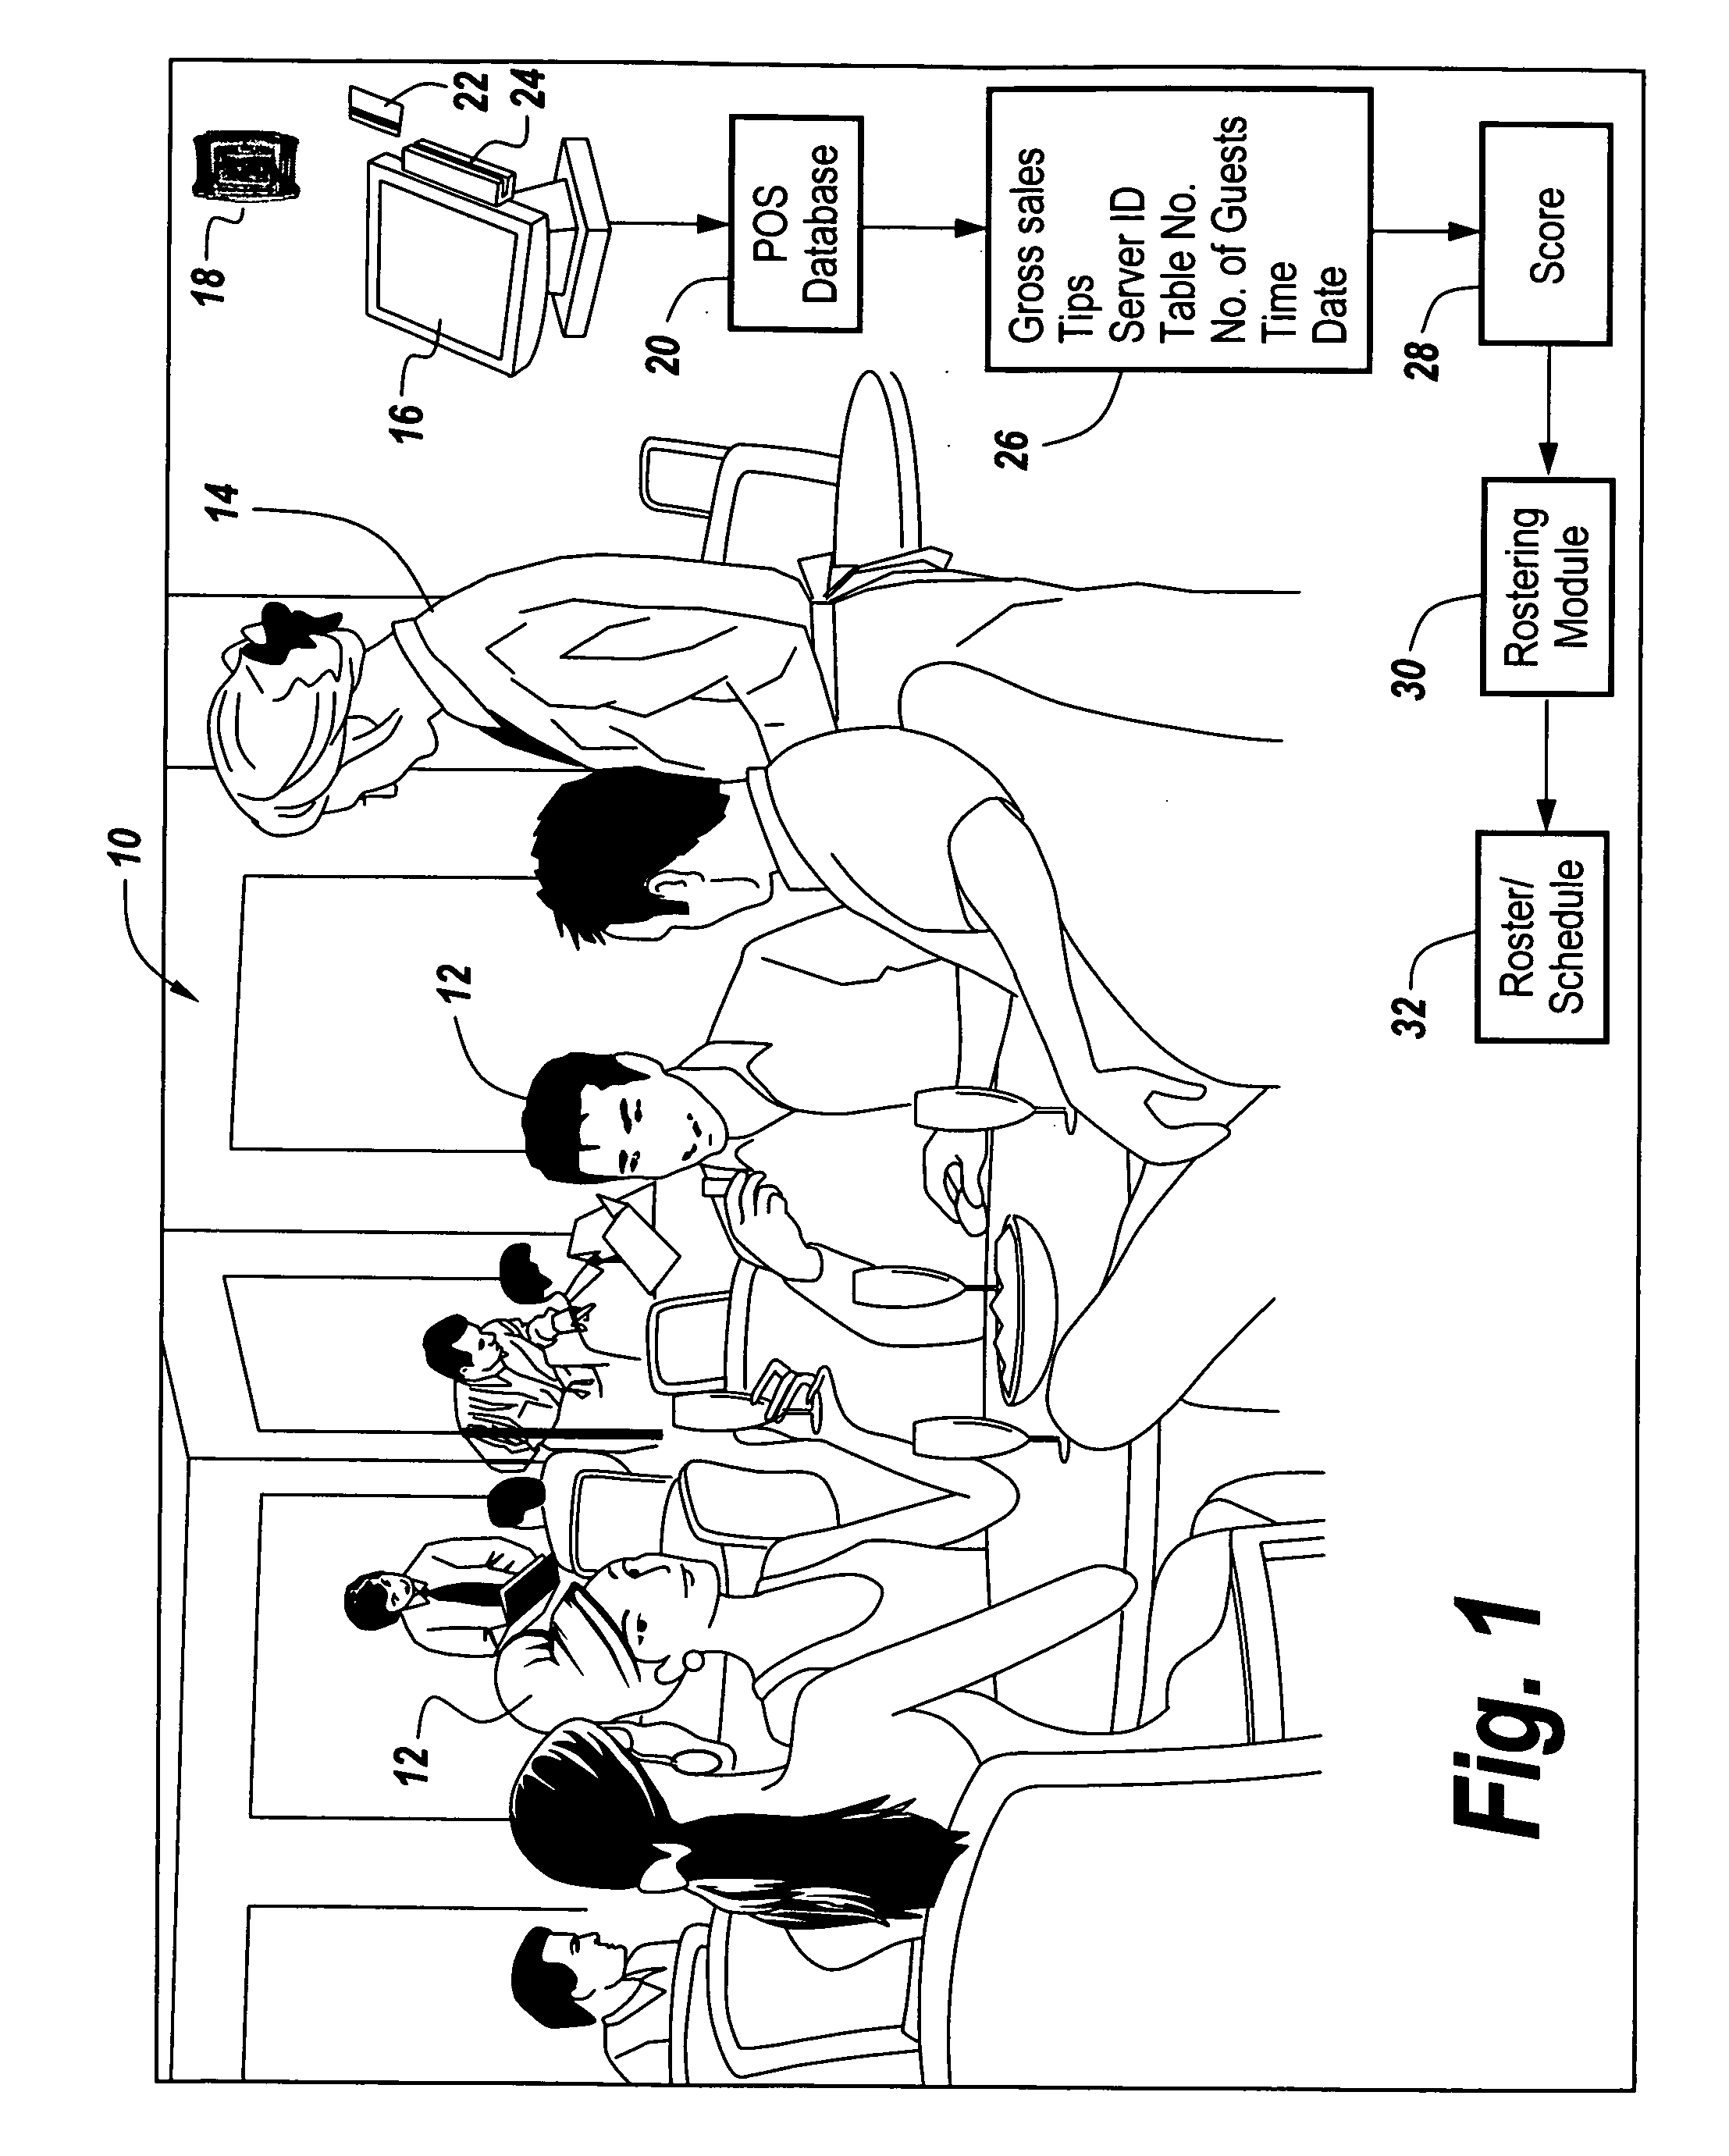 Apparatus for scheduling staff based on performance